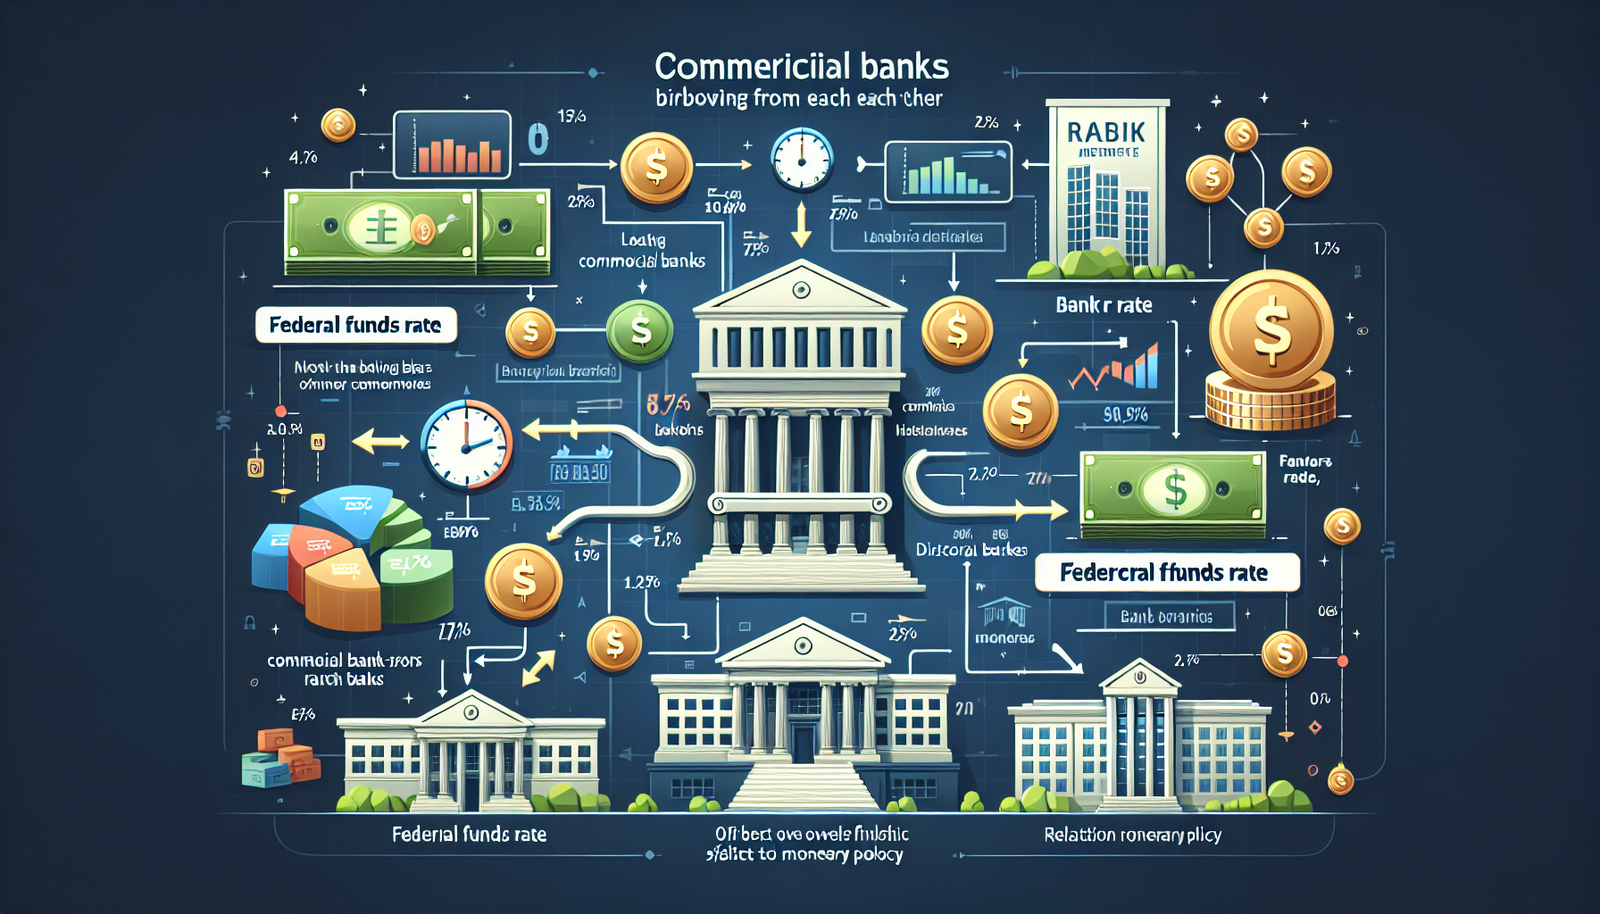 When Commercial Banks Borrow From Each Other They Use Which Interest Rate?